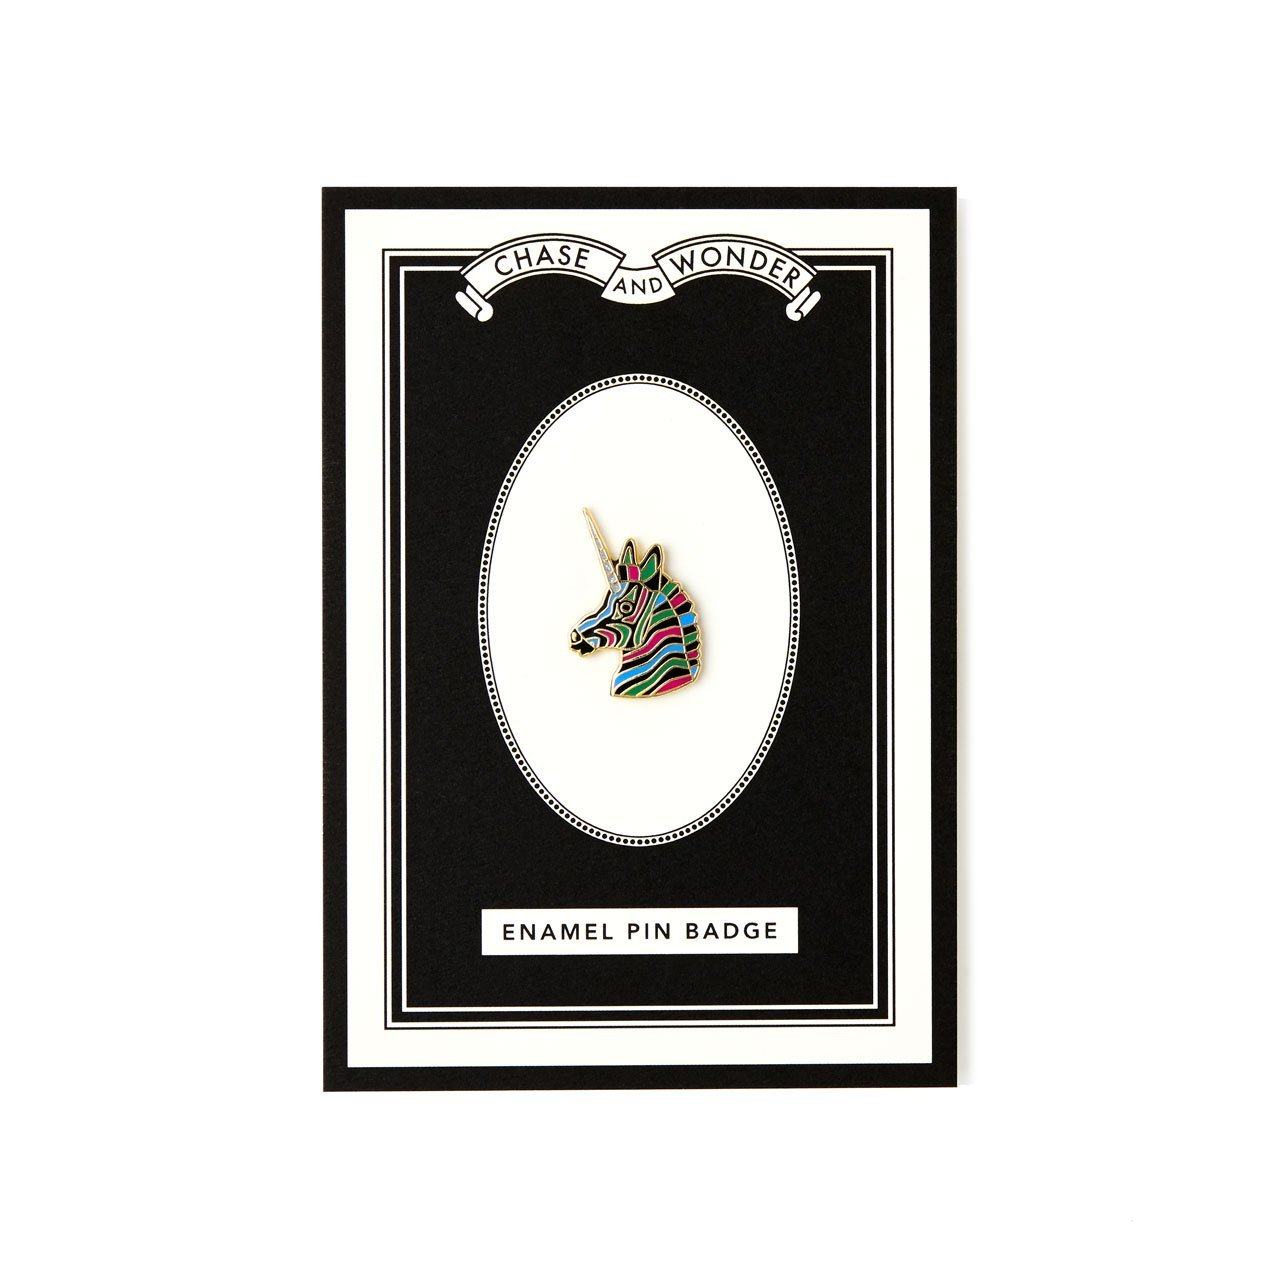 Magical Unicorn Enameled Pin Badge - Chase and Wonder - Proudly Made in Britain